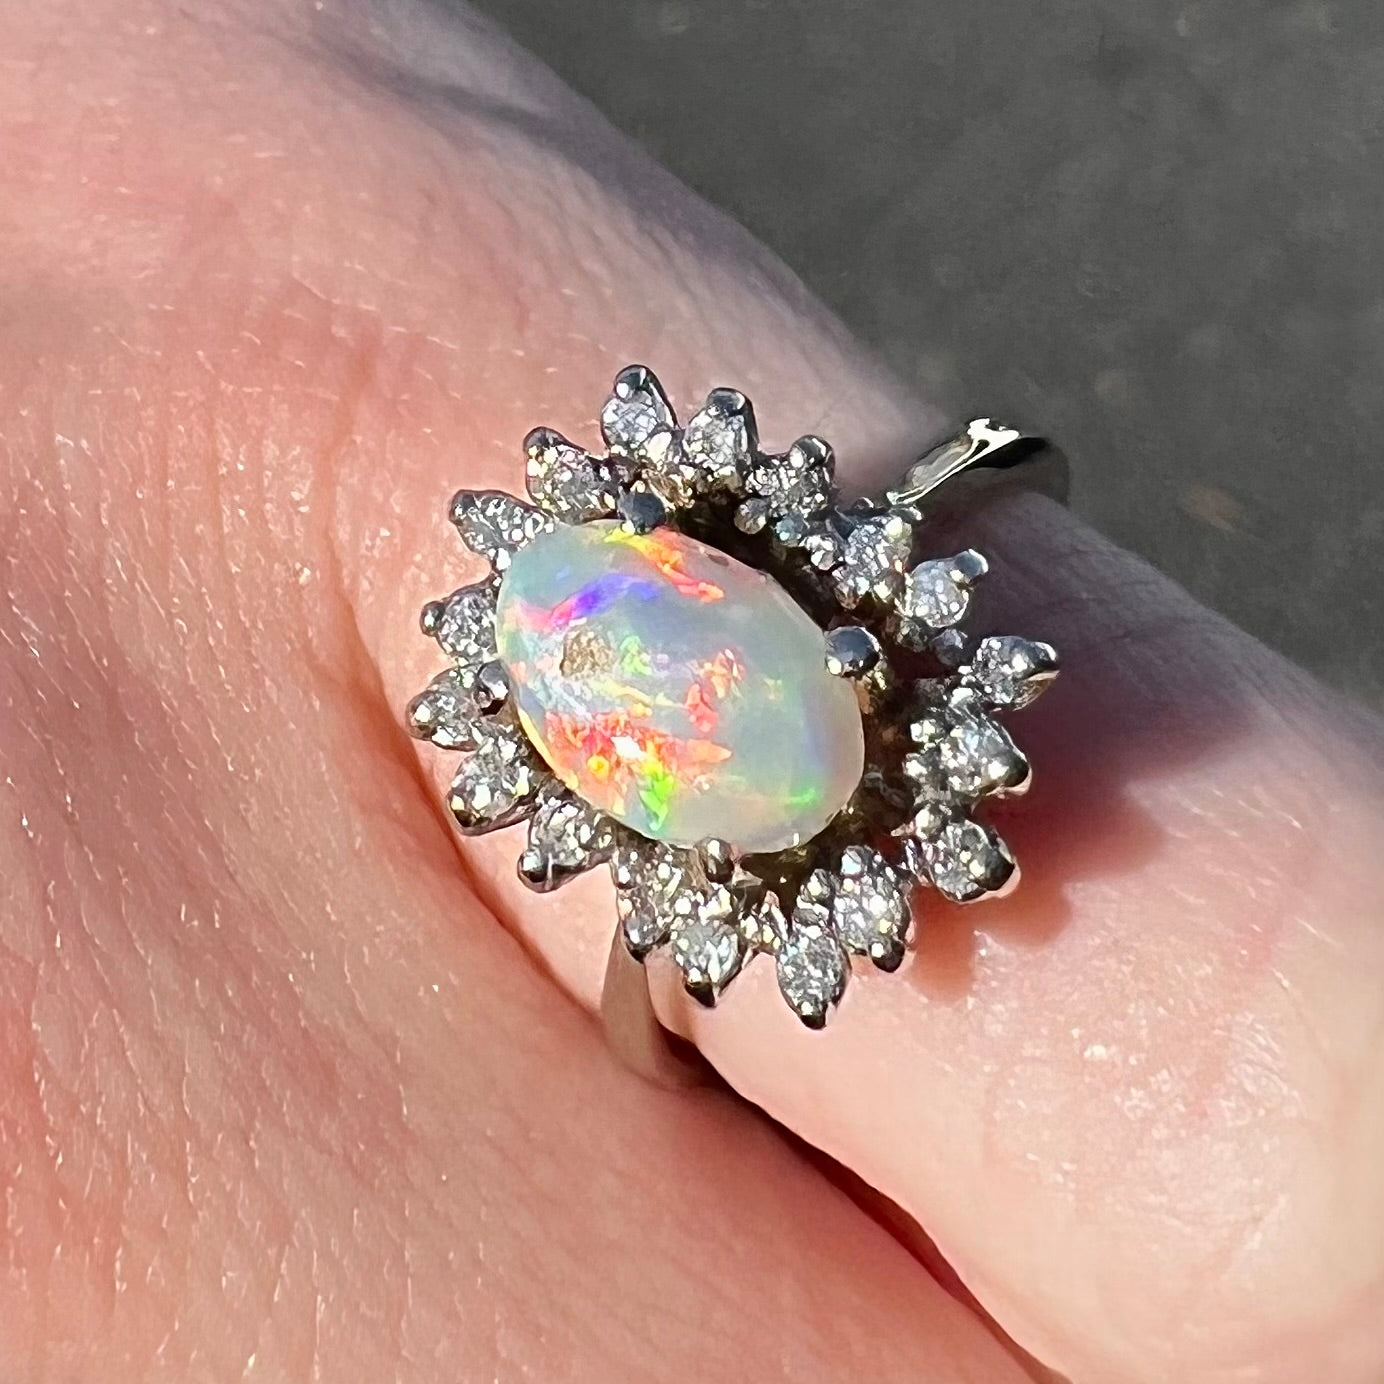 A white crystal opal ring cast in white gold with a halo of round cut diamonds.